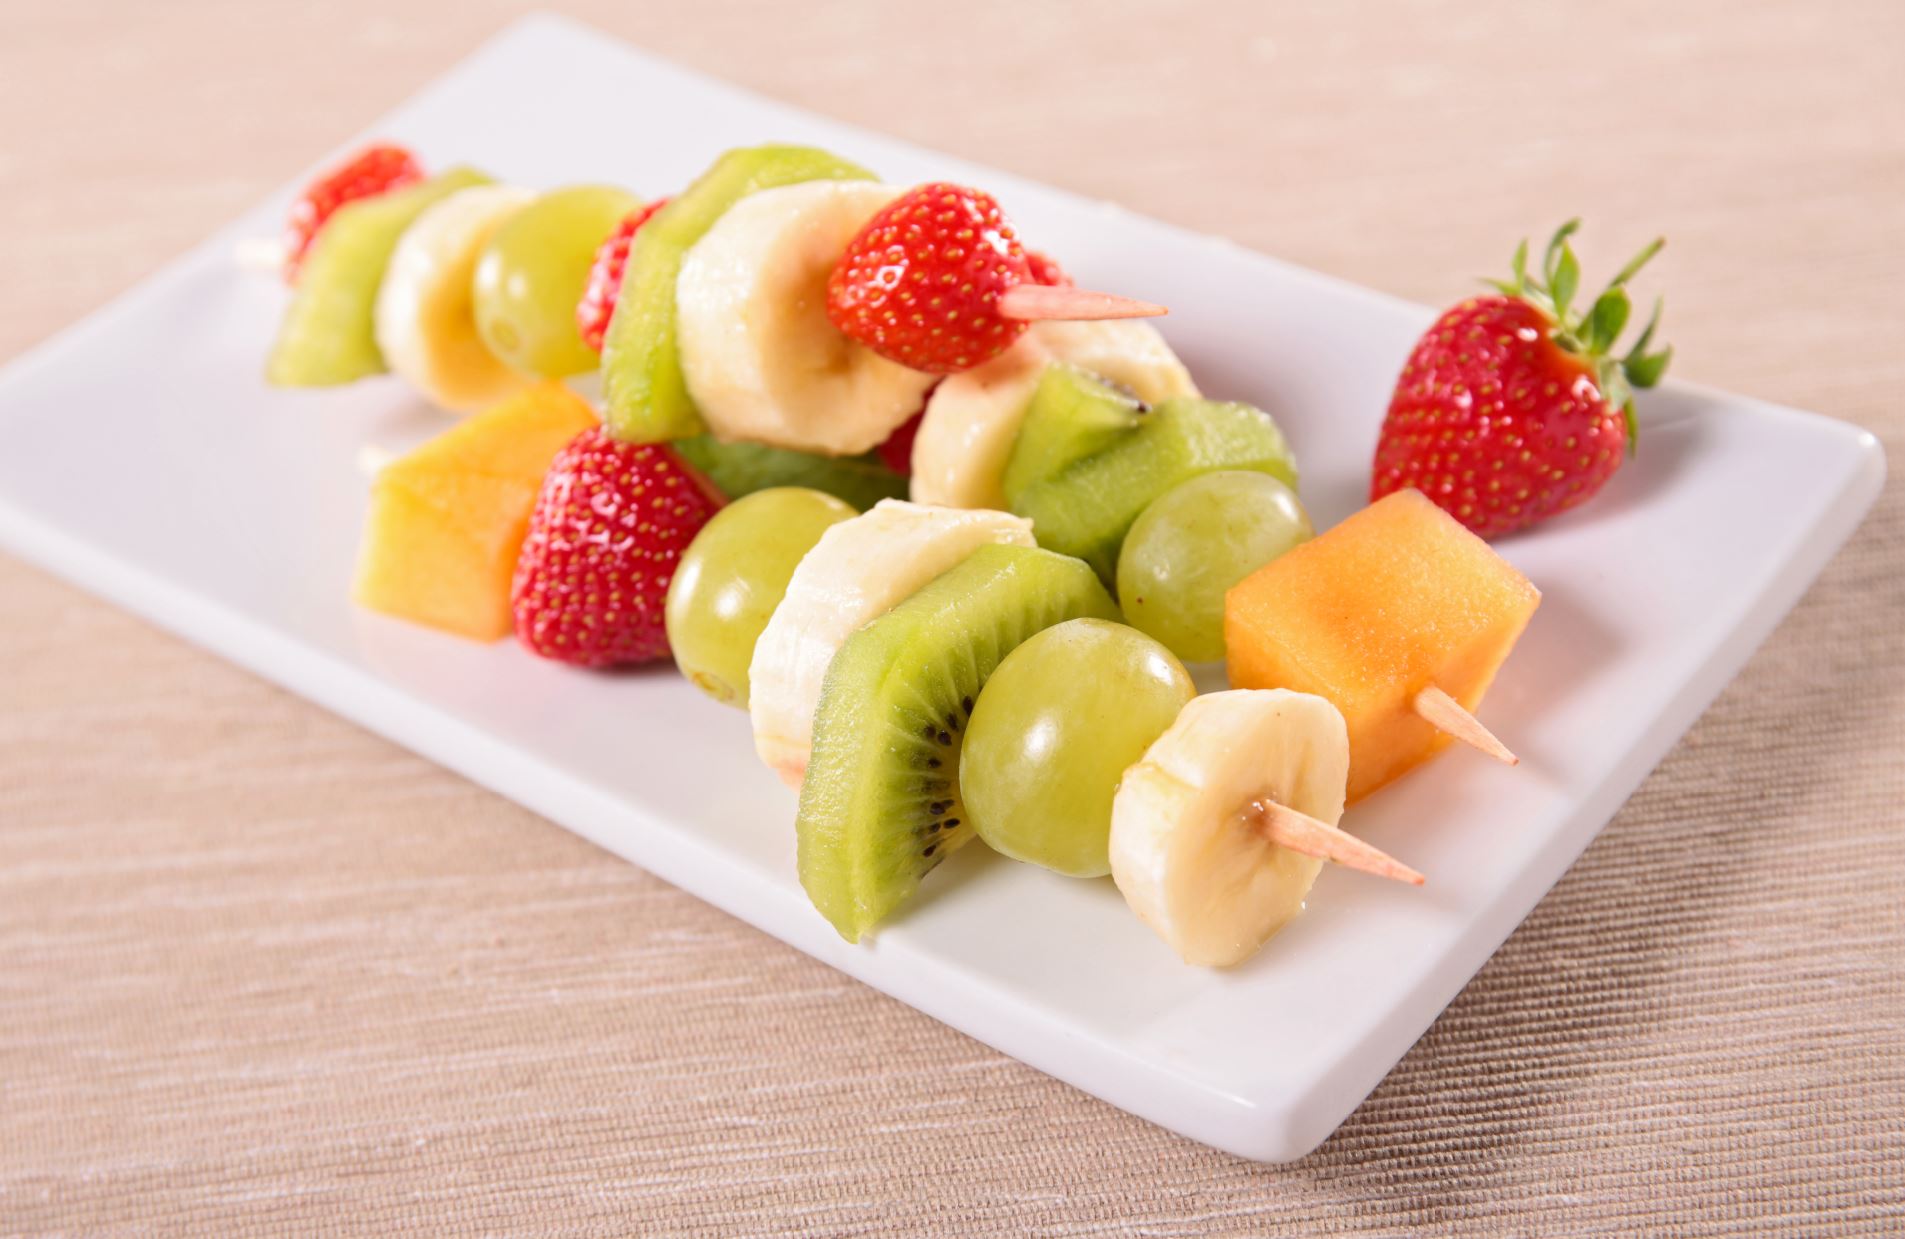 Pieces of colorful fruit on a skewer